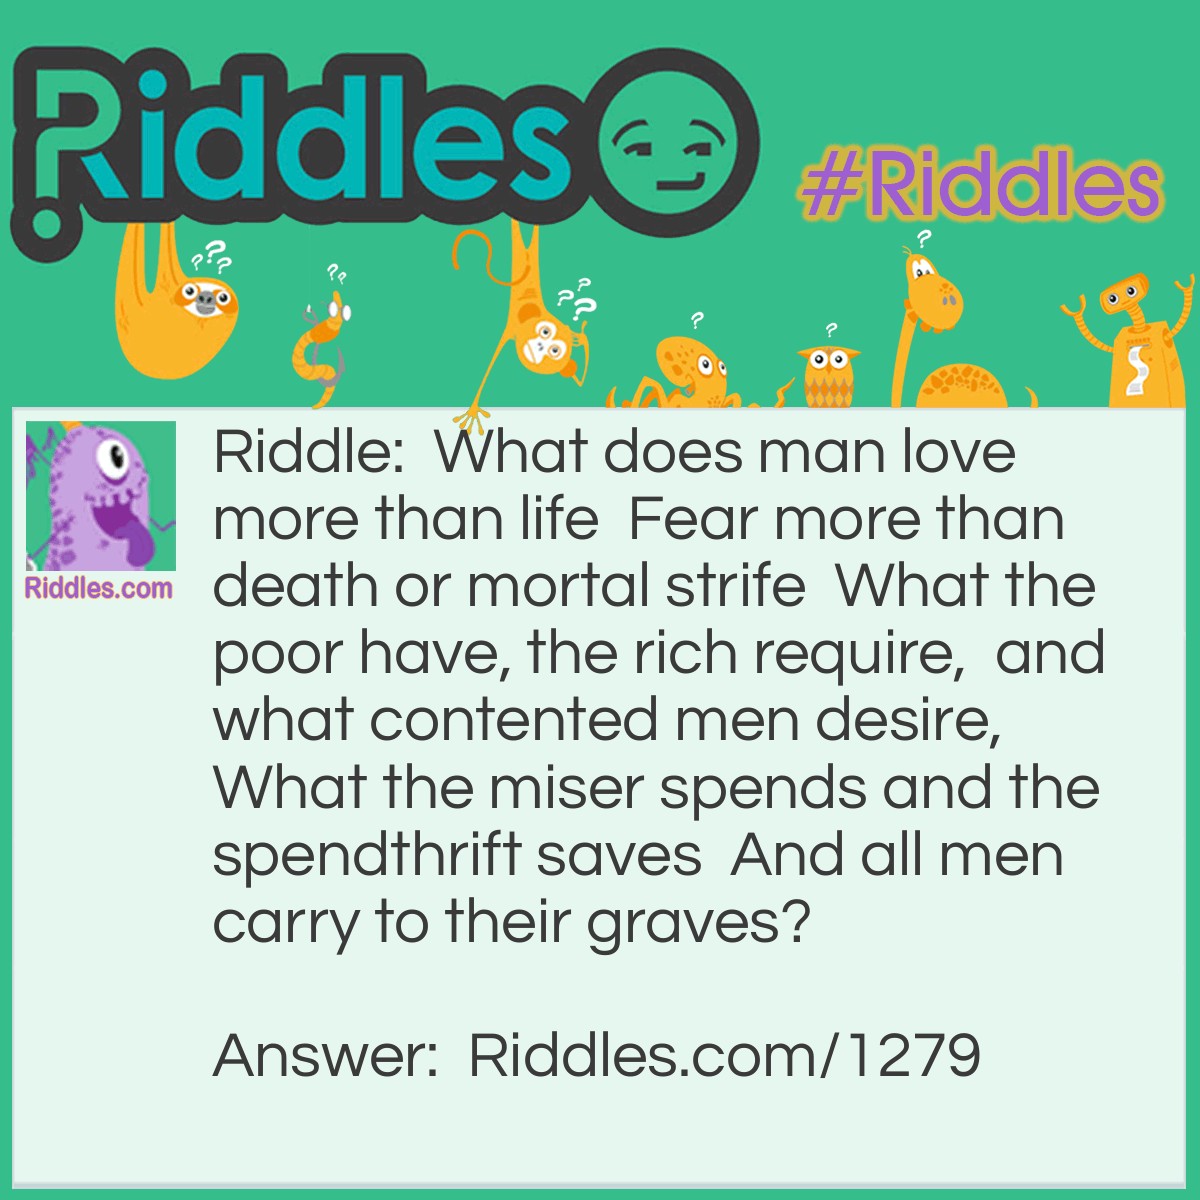 Riddle: What does man love more than life  Fear more than death or mortal strife  What the poor have, the rich require,  and what contented men desire,  What the miser spends and the spendthrift saves  And all men carry to their graves? Answer: Nothing.